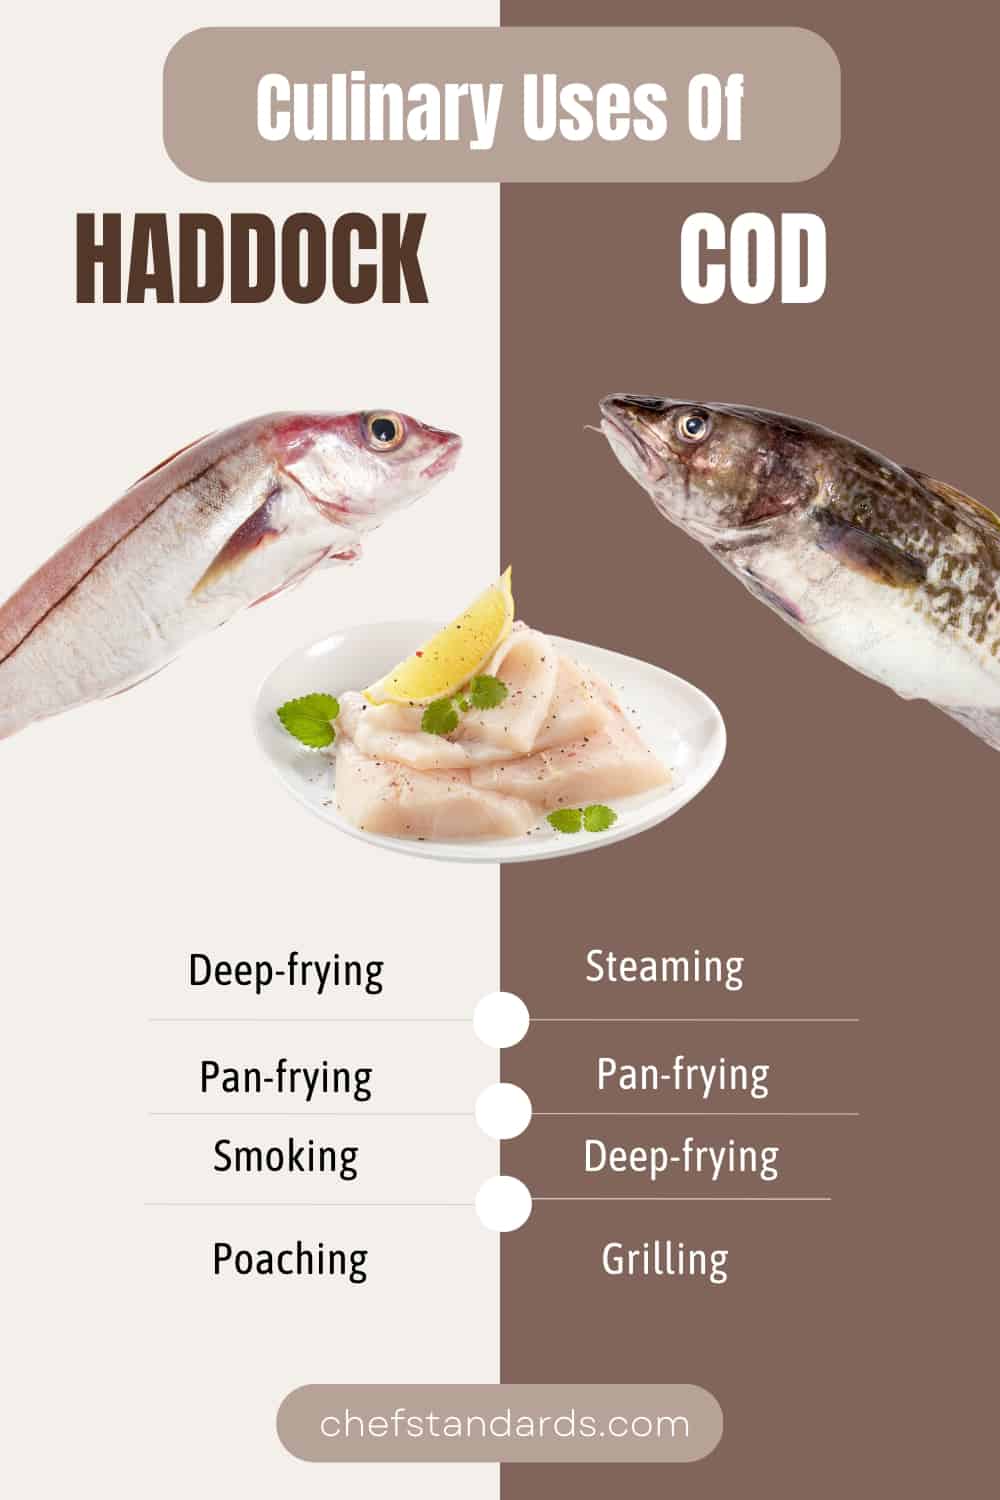 differences in culinary usage between haddock and cod